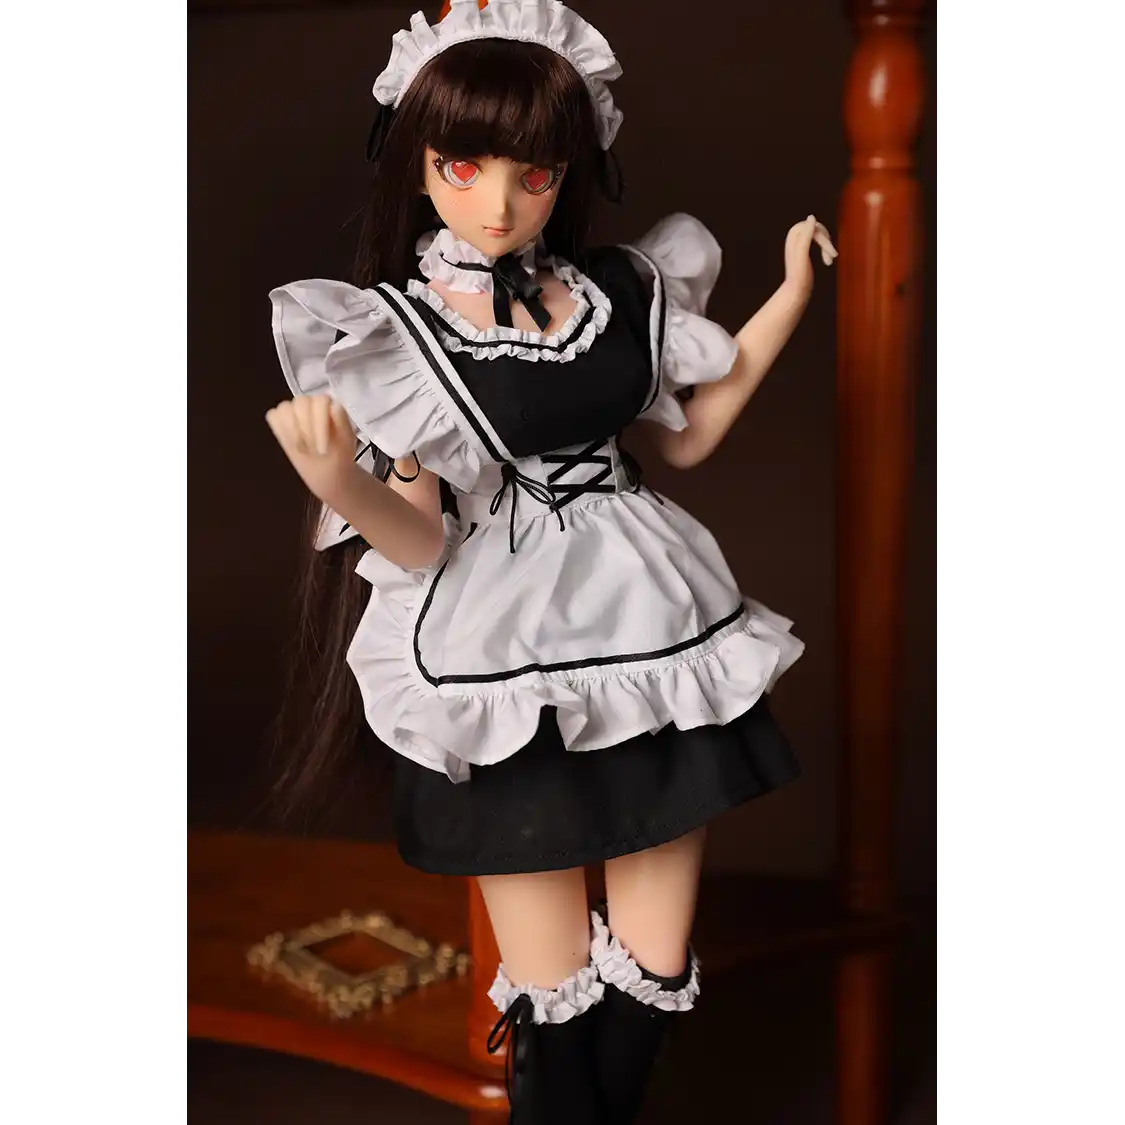 2ft 60cm anime style female mini silicone sex doll with medium breasts, tanned skin and a fit athletic body in a French maids outfit.